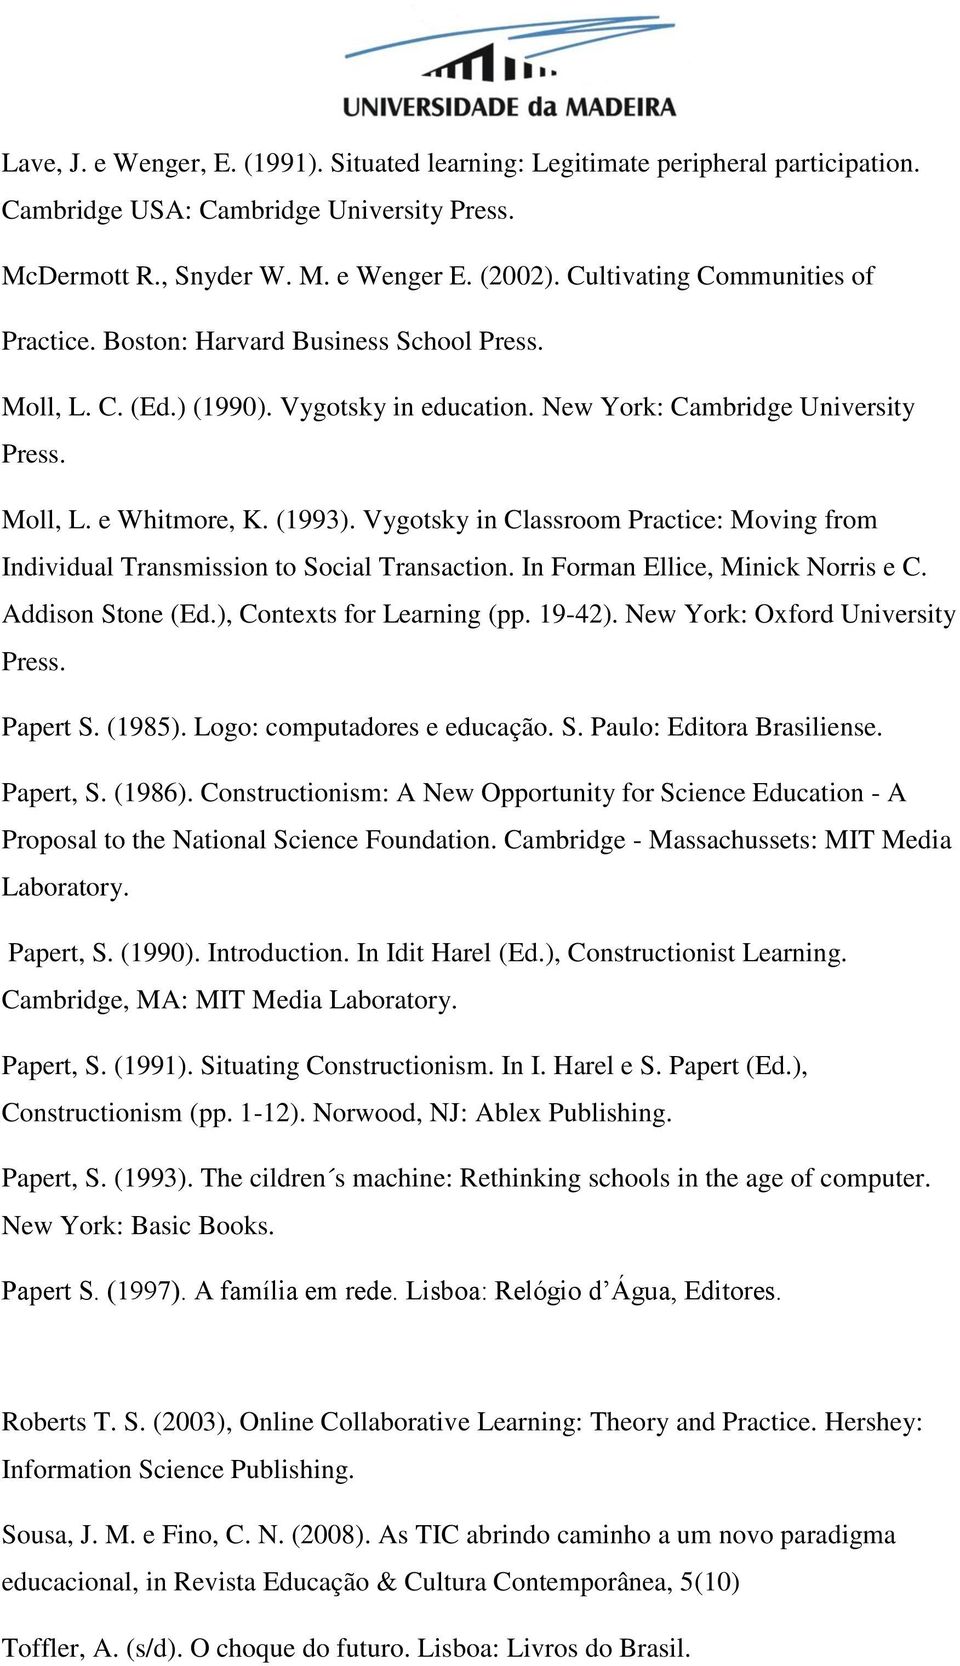 Vygotsky in Classroom Practice: Moving from Individual Transmission to Social Transaction. In Forman Ellice, Minick Norris e C. Addison Stone (Ed.), Contexts for Learning (pp. 19-42).